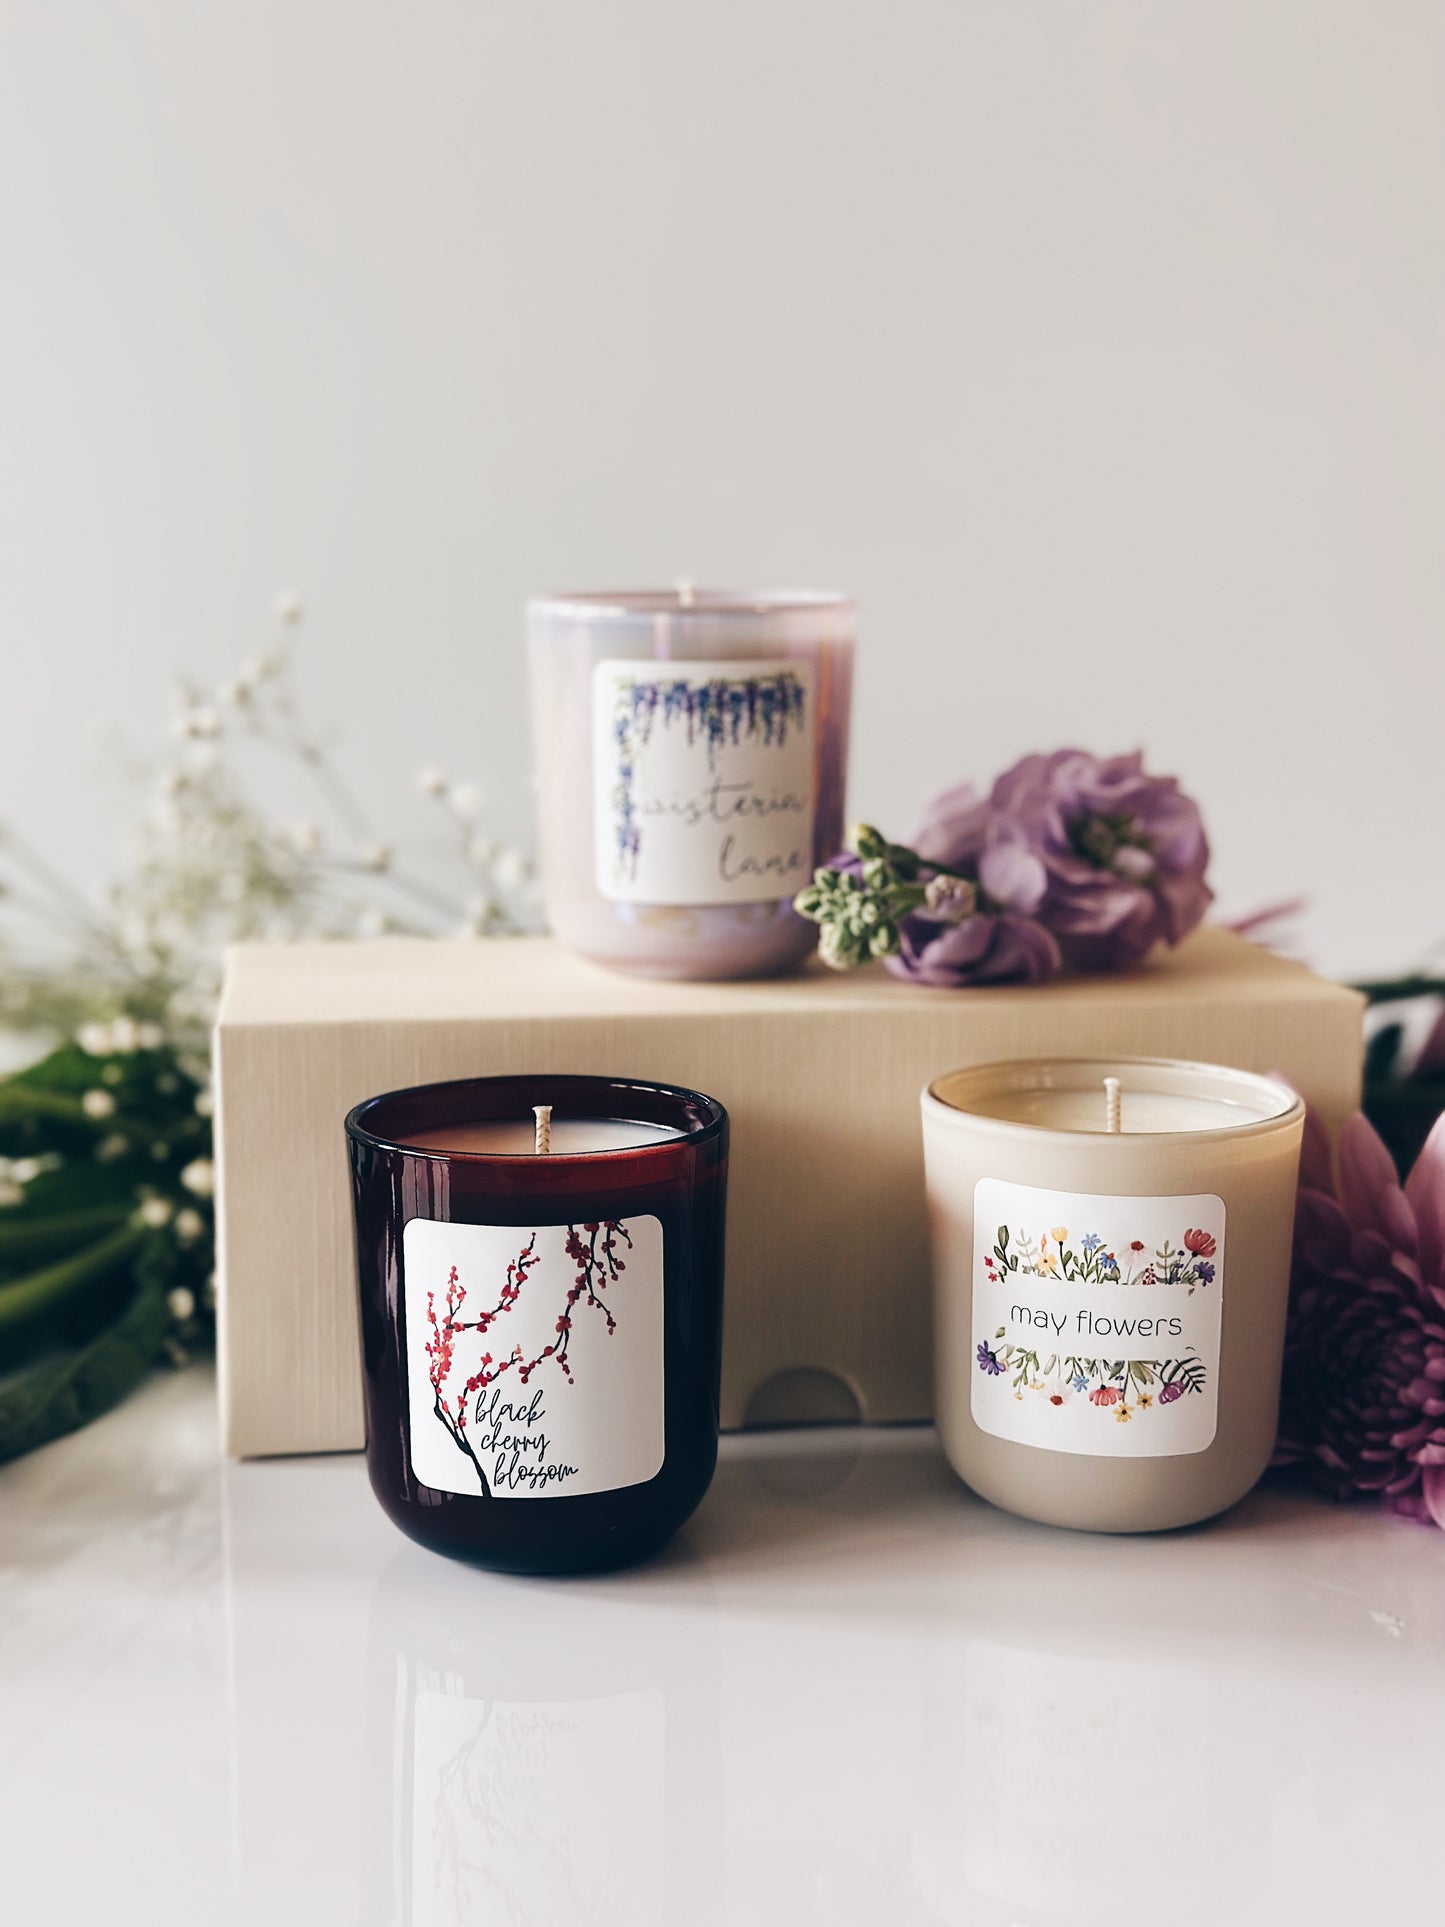 en mer | bouquet of candles | soy wax candle gift set